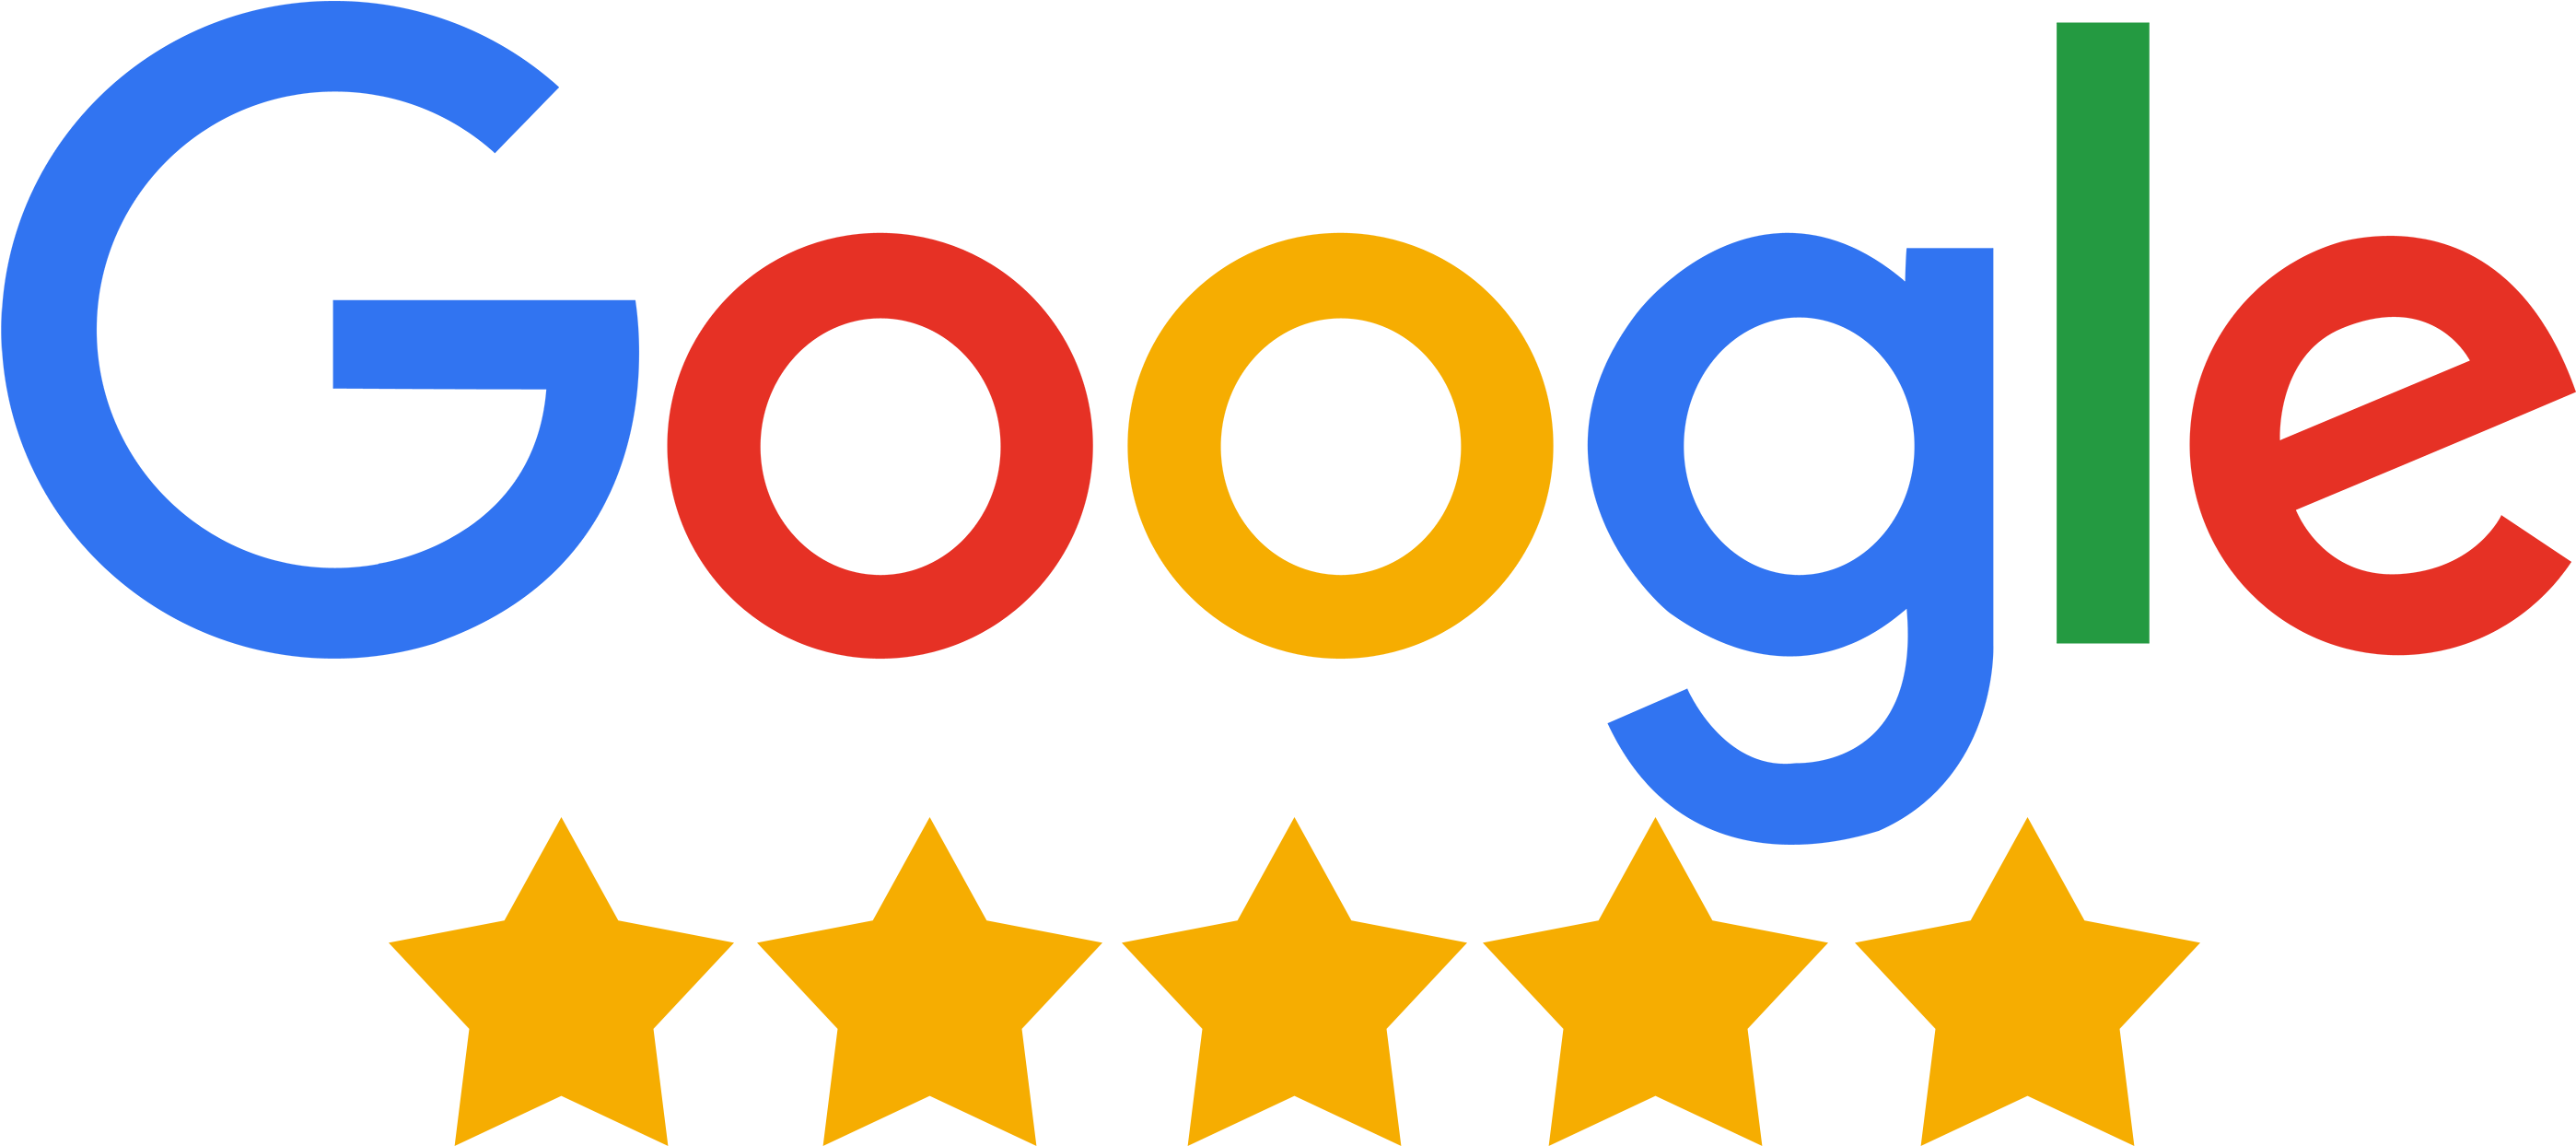 Attention To Detail Moving Company Military Inspired - Five Star Google Rating (3000x1250)